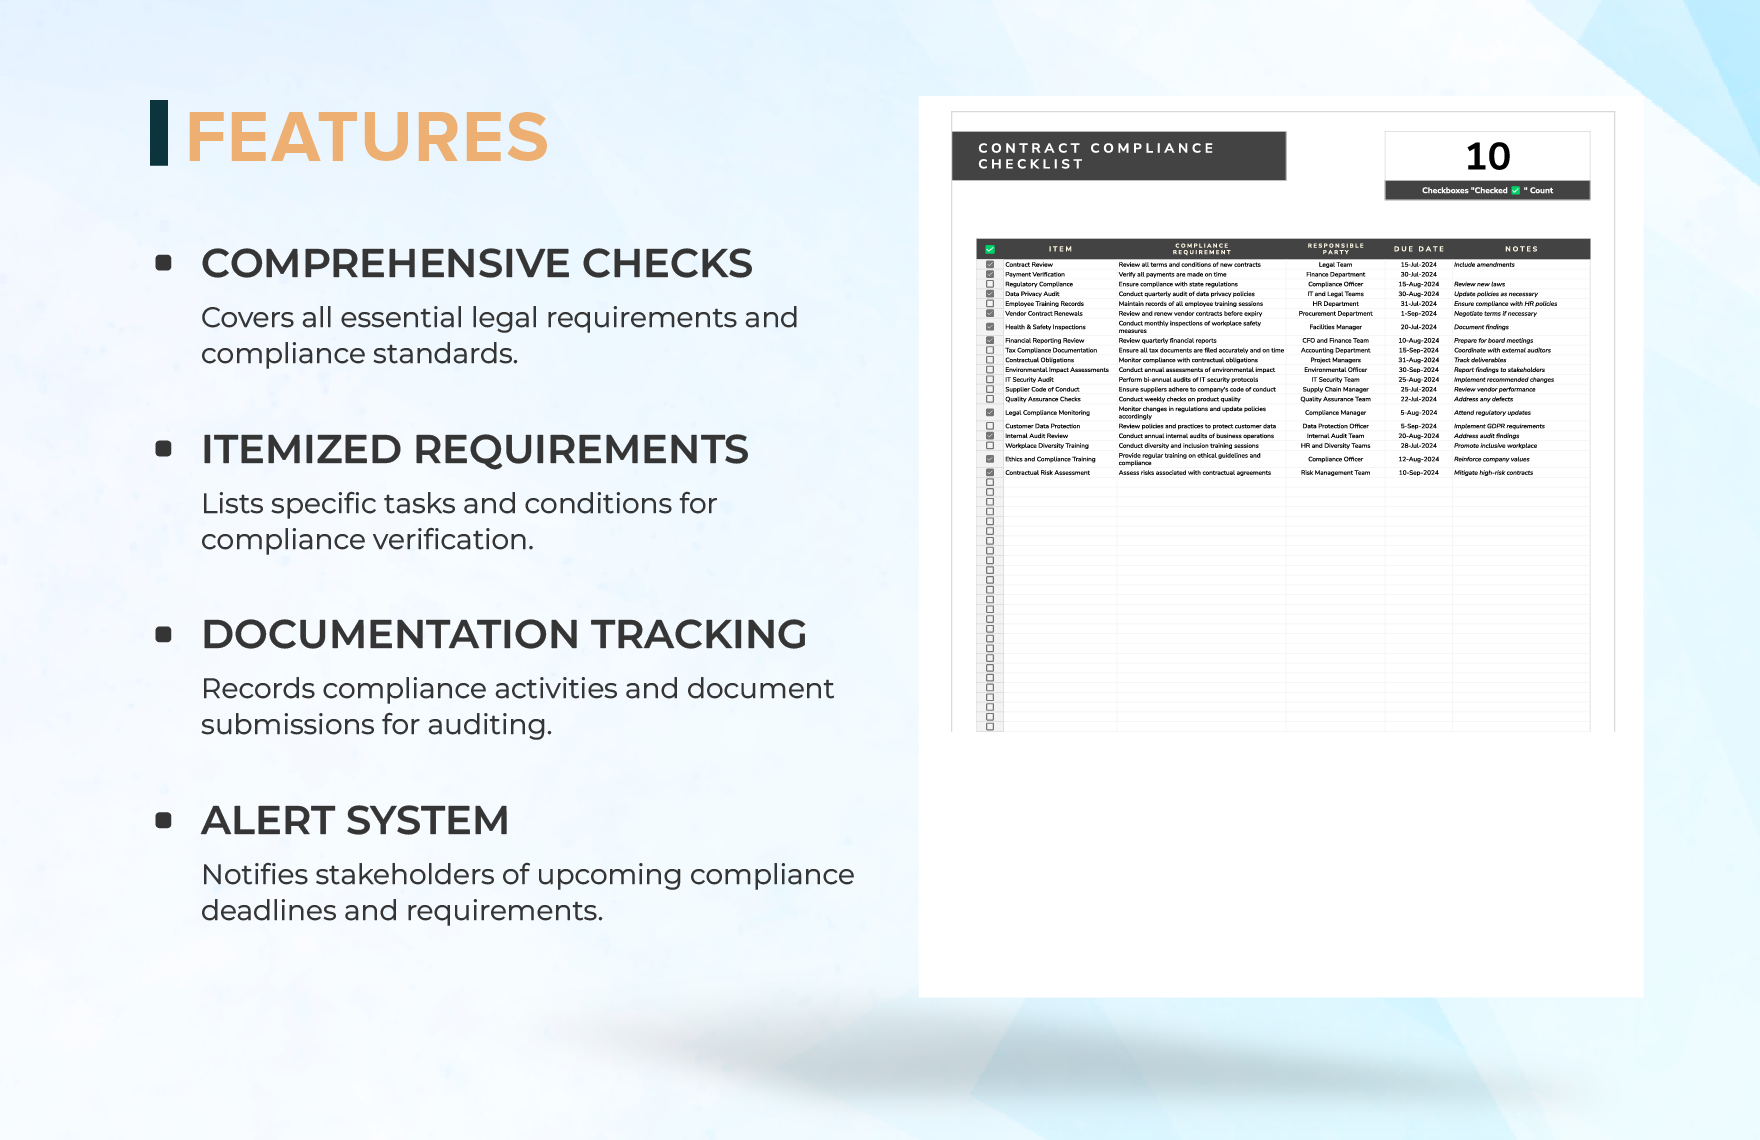 Legal Contract Compliance Checklist Template